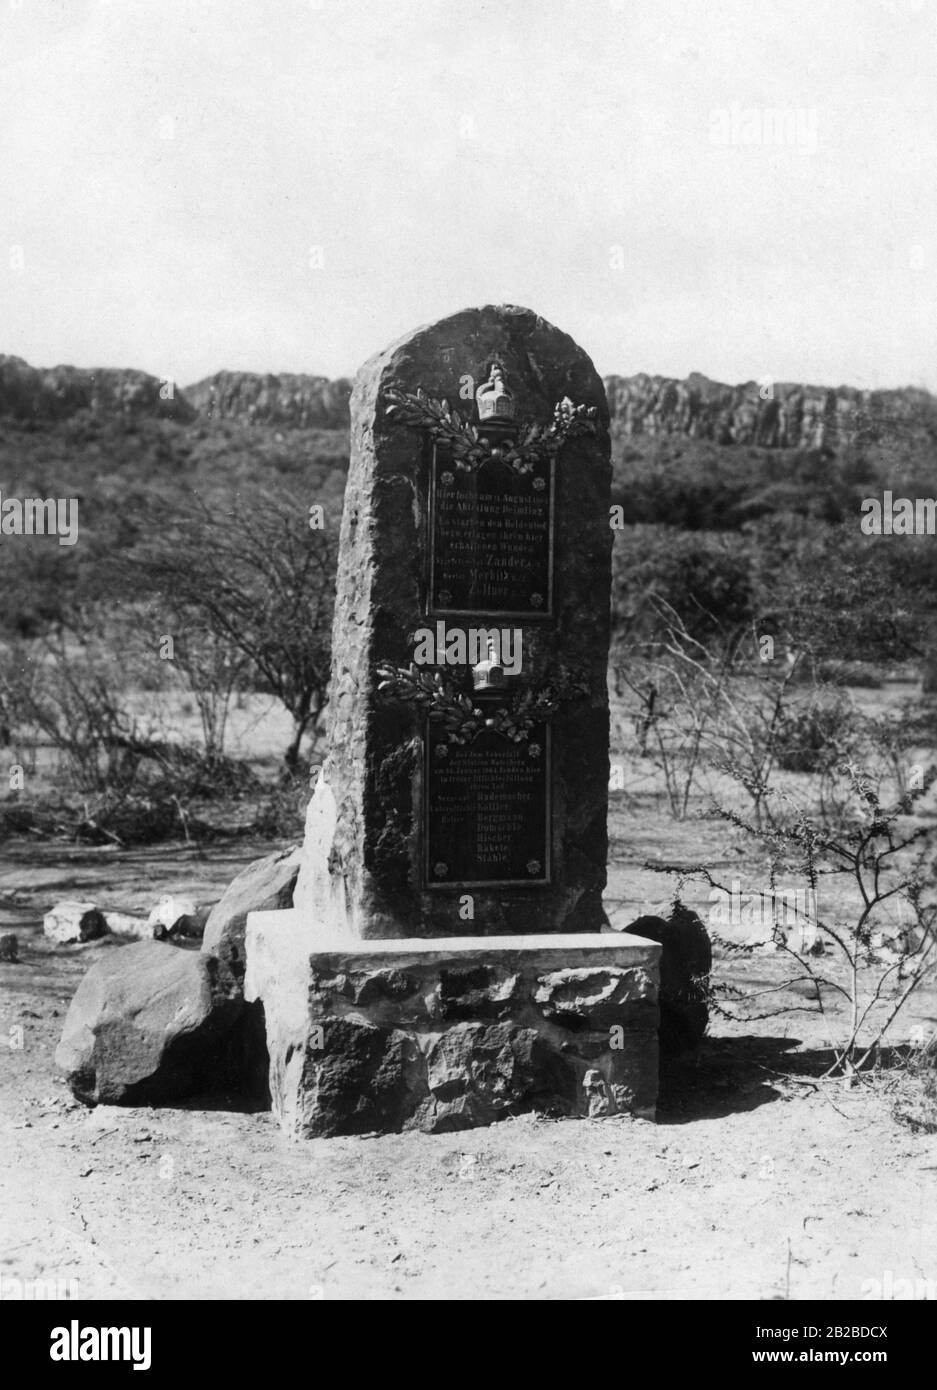 Monument to the German soldiers killed in the fighting on Waterberg in August 1904 in the fight against the insurgent Herero tribes. The outcome of this battle involving heavy losses brought about the end of the uprising. Stock Photo